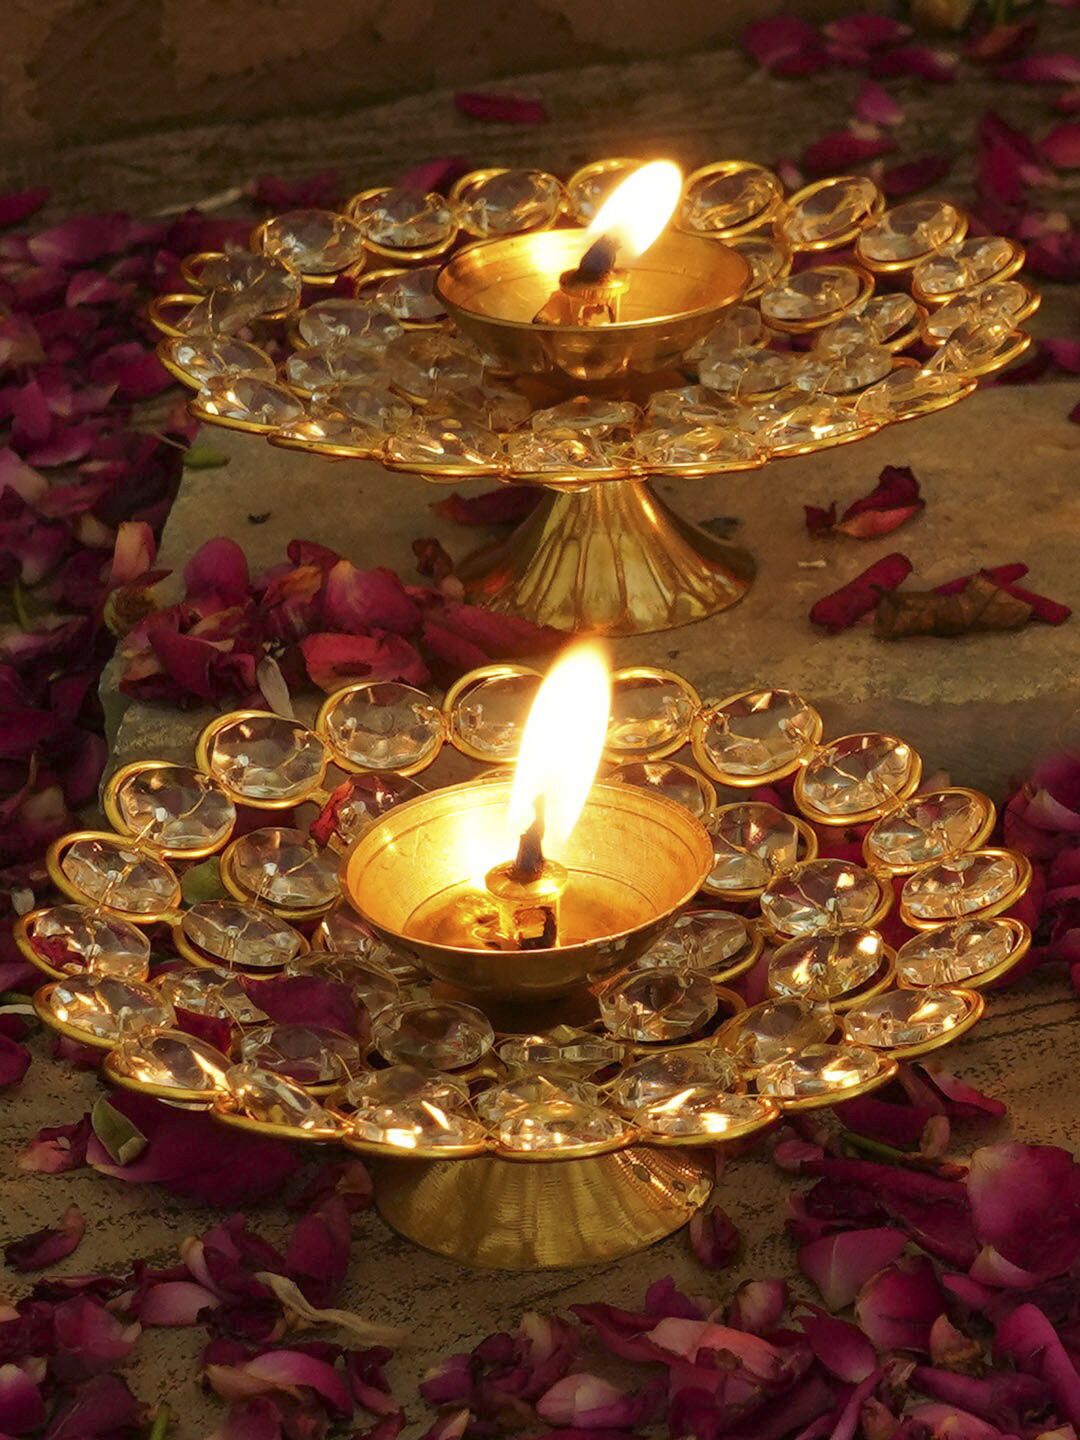 TIED RIBBONS Set of 2 Gold-Toned Decorative Crystal Diyas Price in India